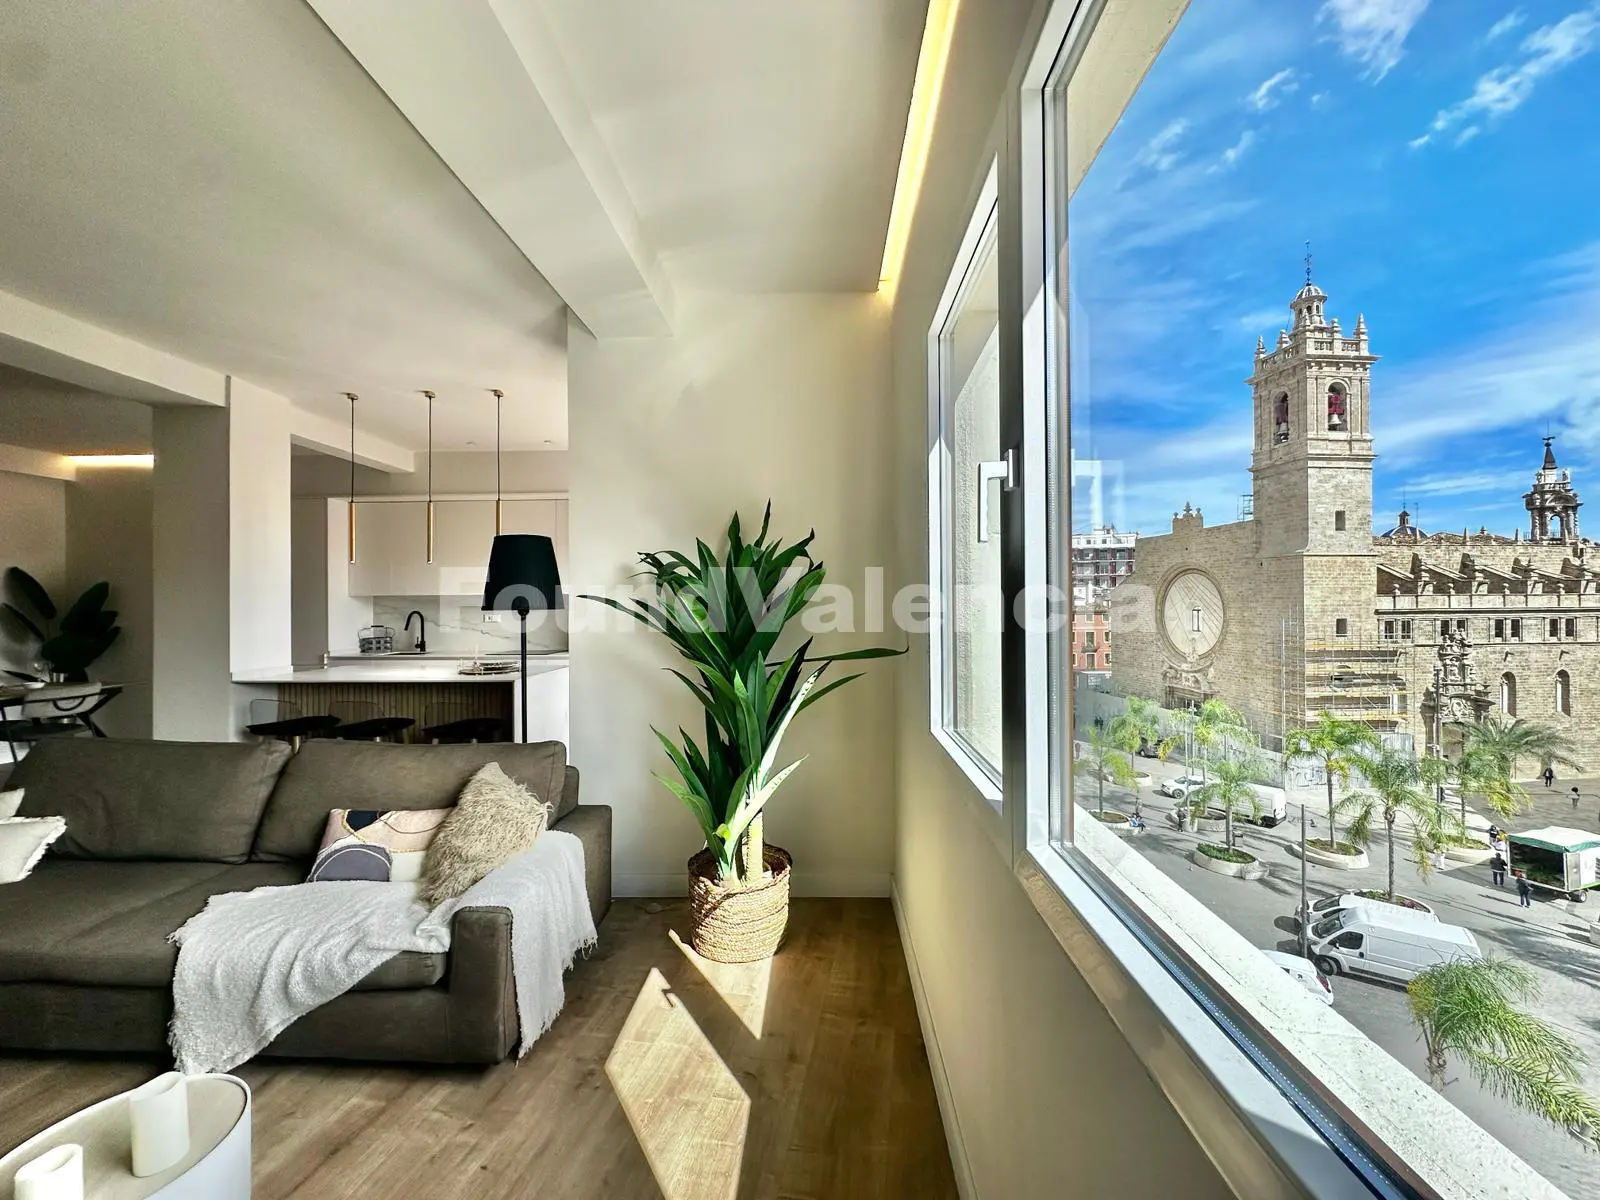 Newly Renovated Home with Views of the Central Market of Valencia